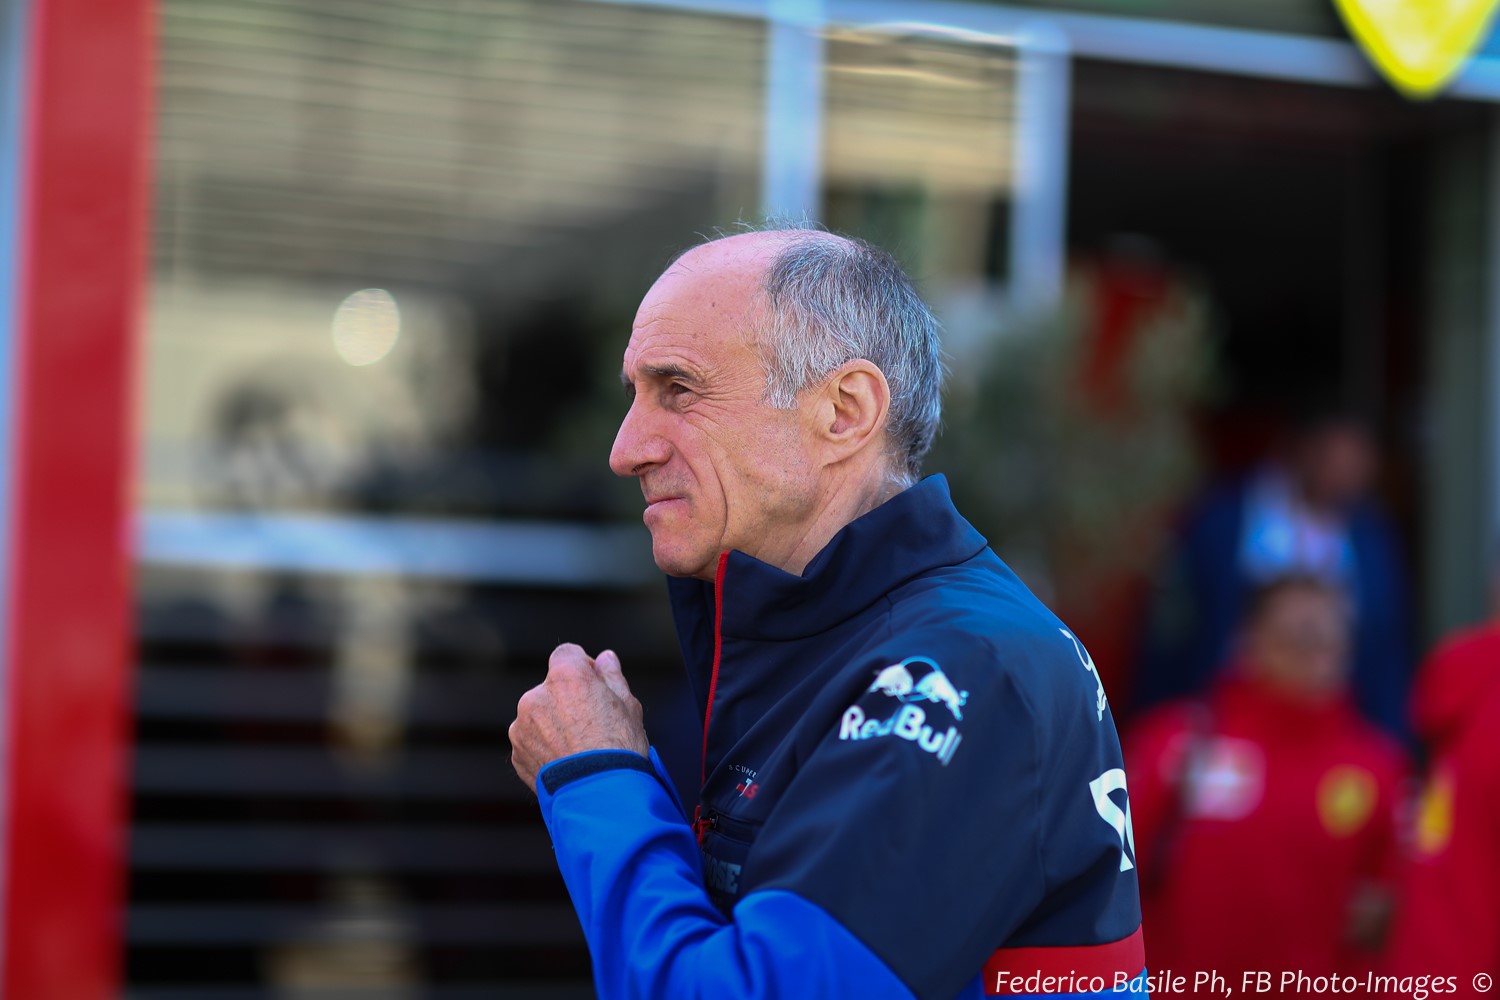 Franz Tost disagrees with over 22 races, Marko does not